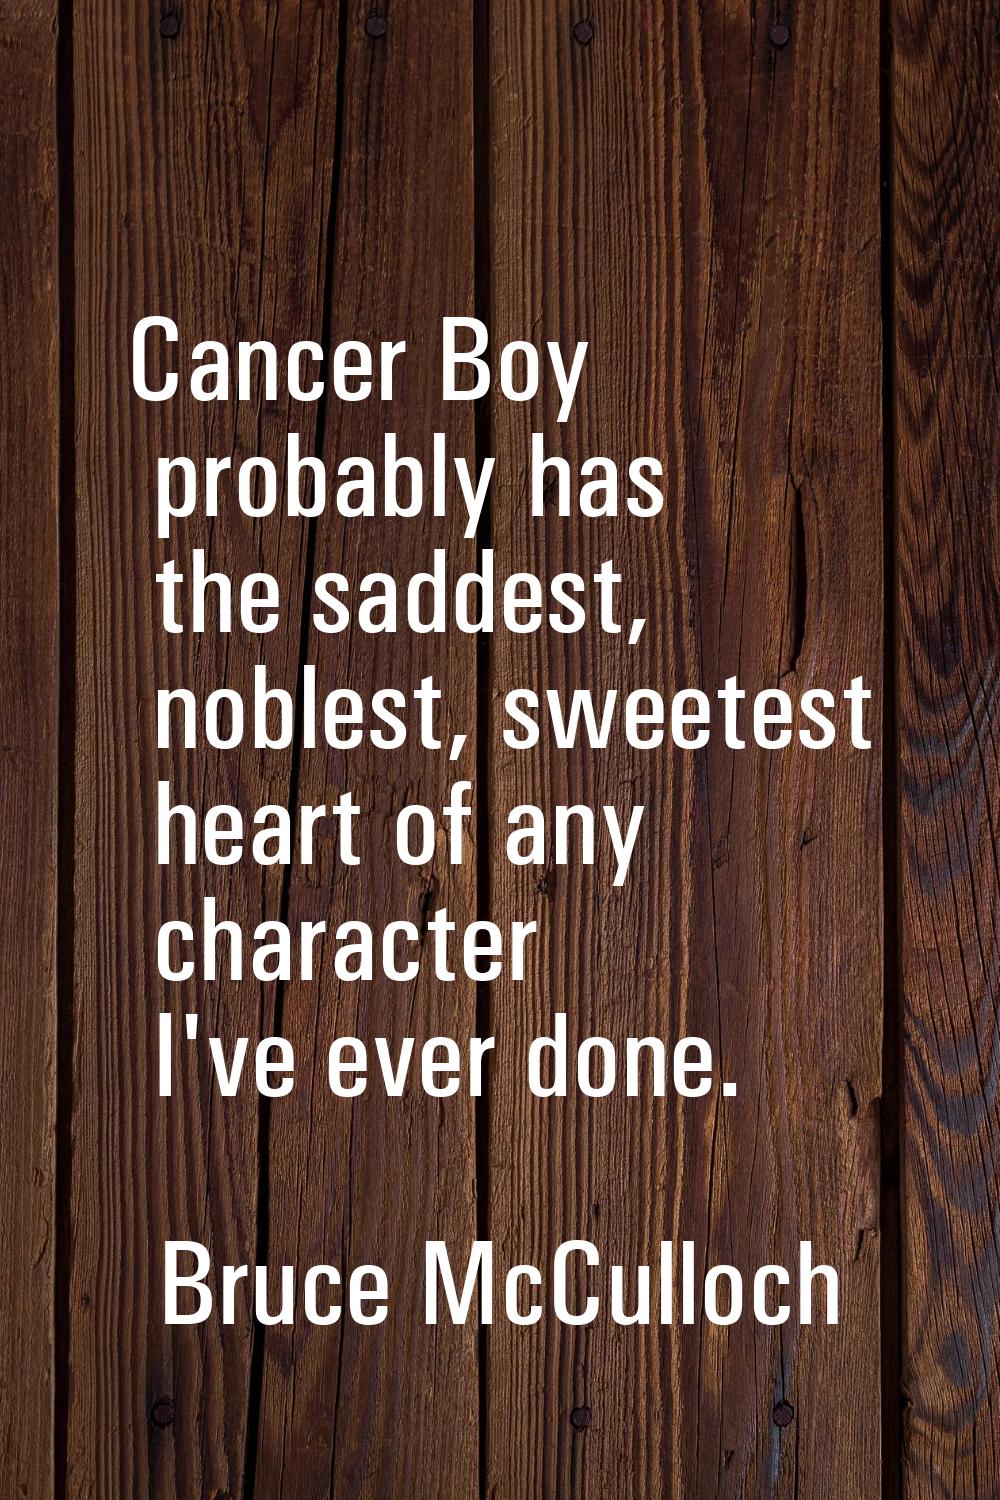 Cancer Boy probably has the saddest, noblest, sweetest heart of any character I've ever done.